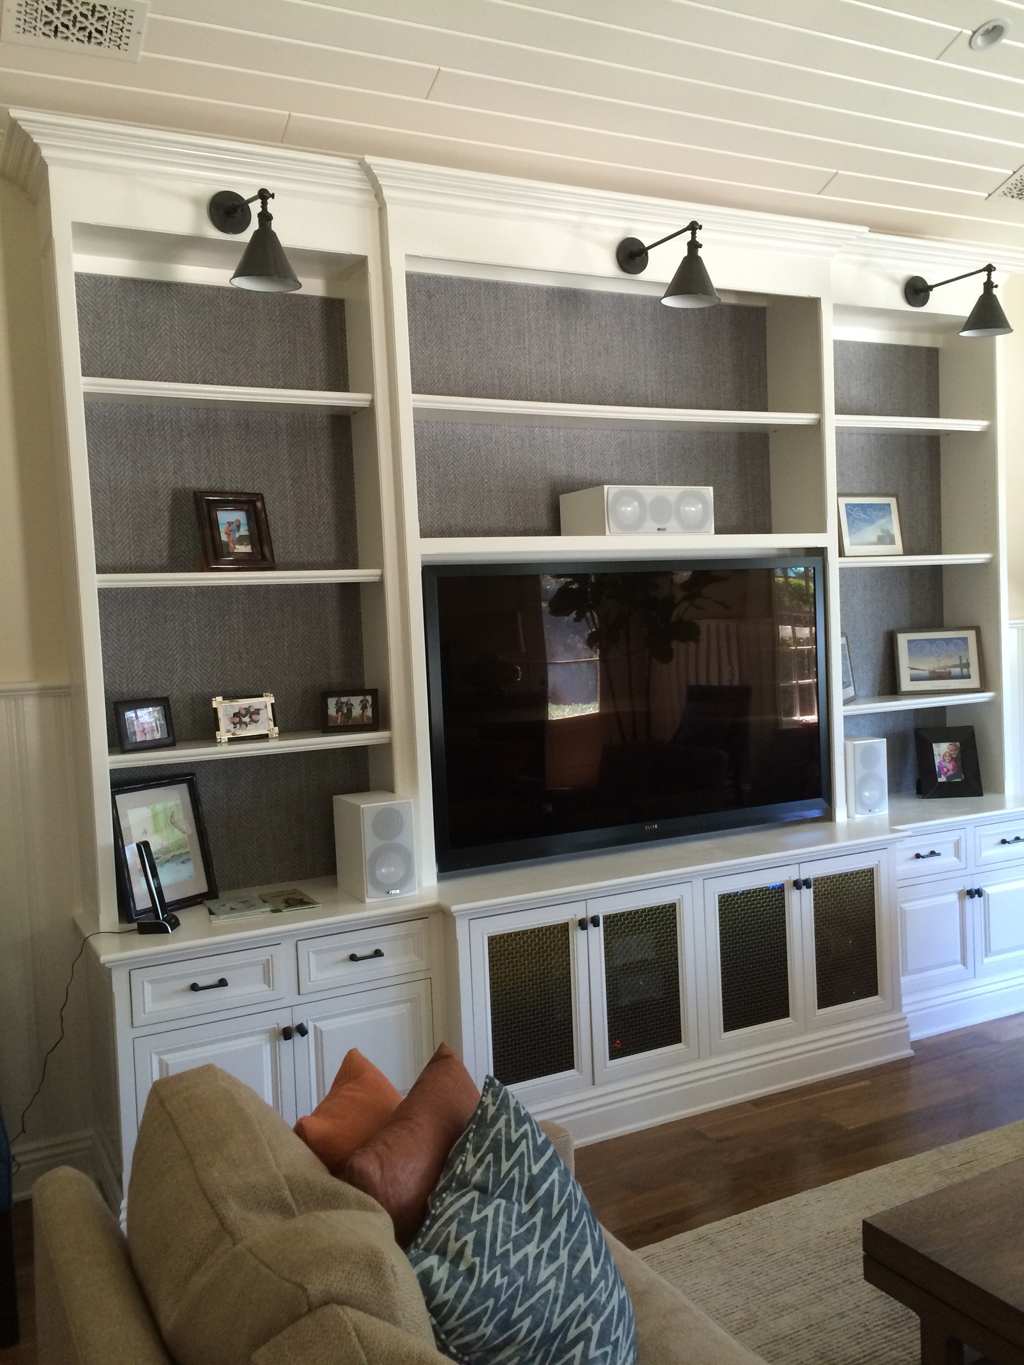 Custom television cabinet with light & storage on sides - Brentwood residence